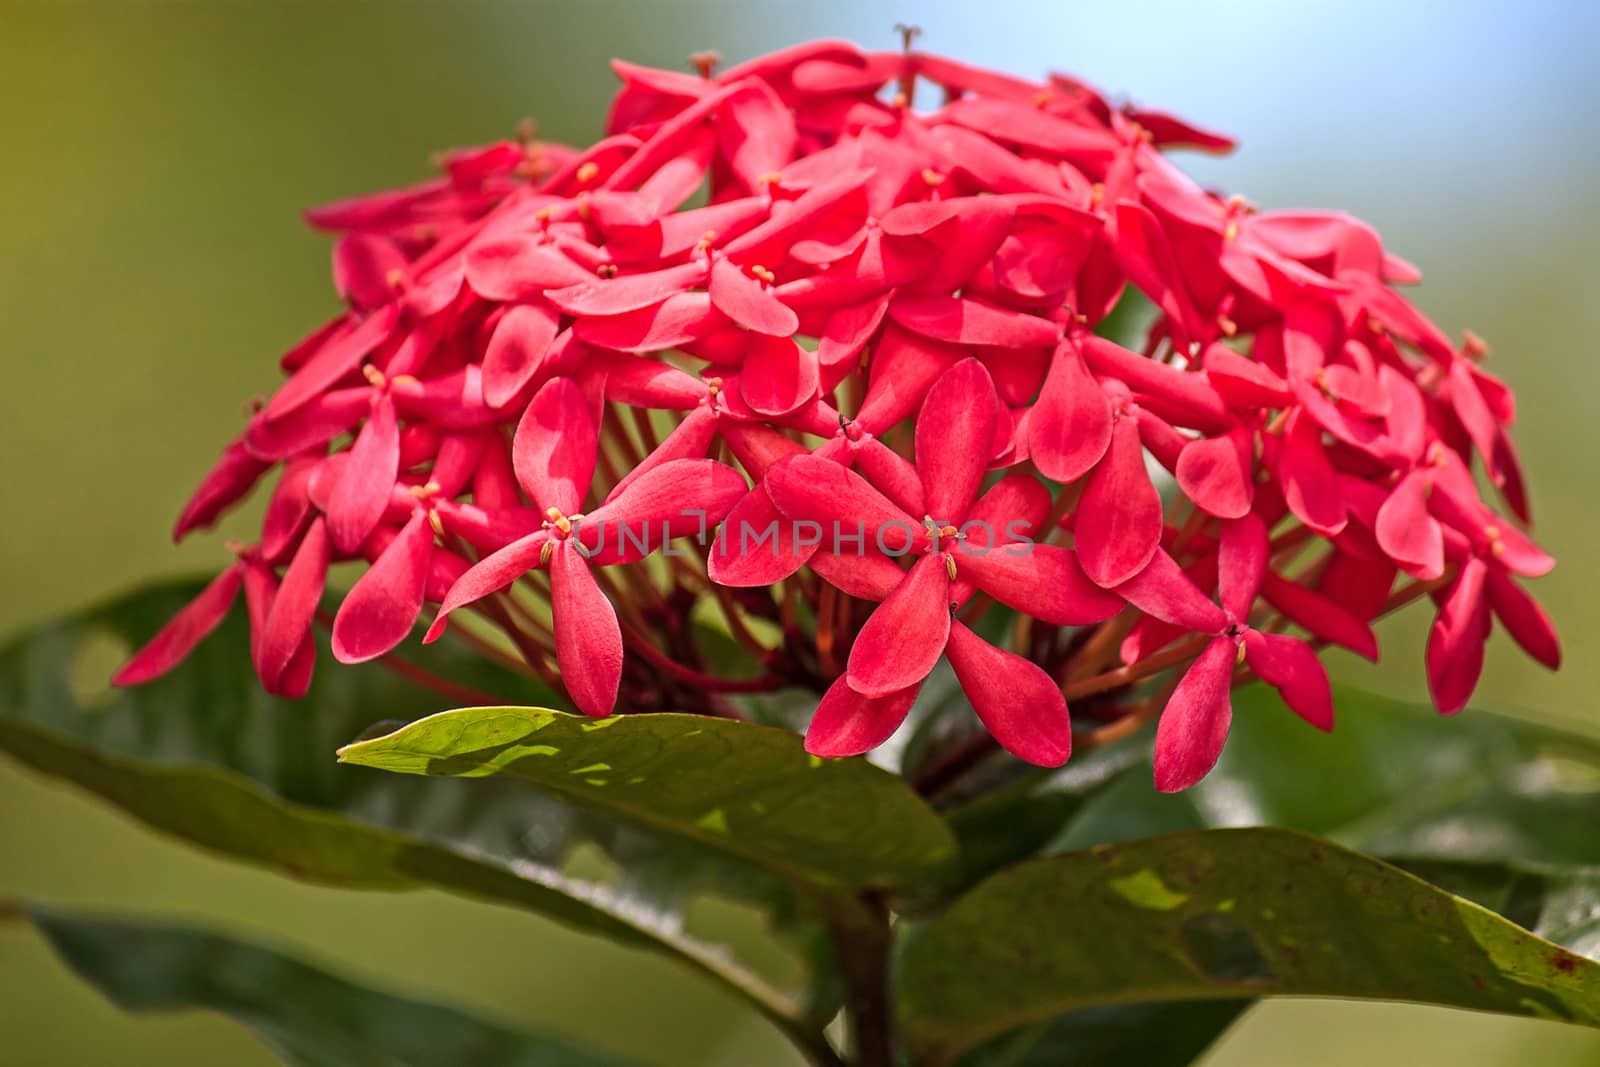 Ixora flowers close-up on a background of leaves, Thailand.